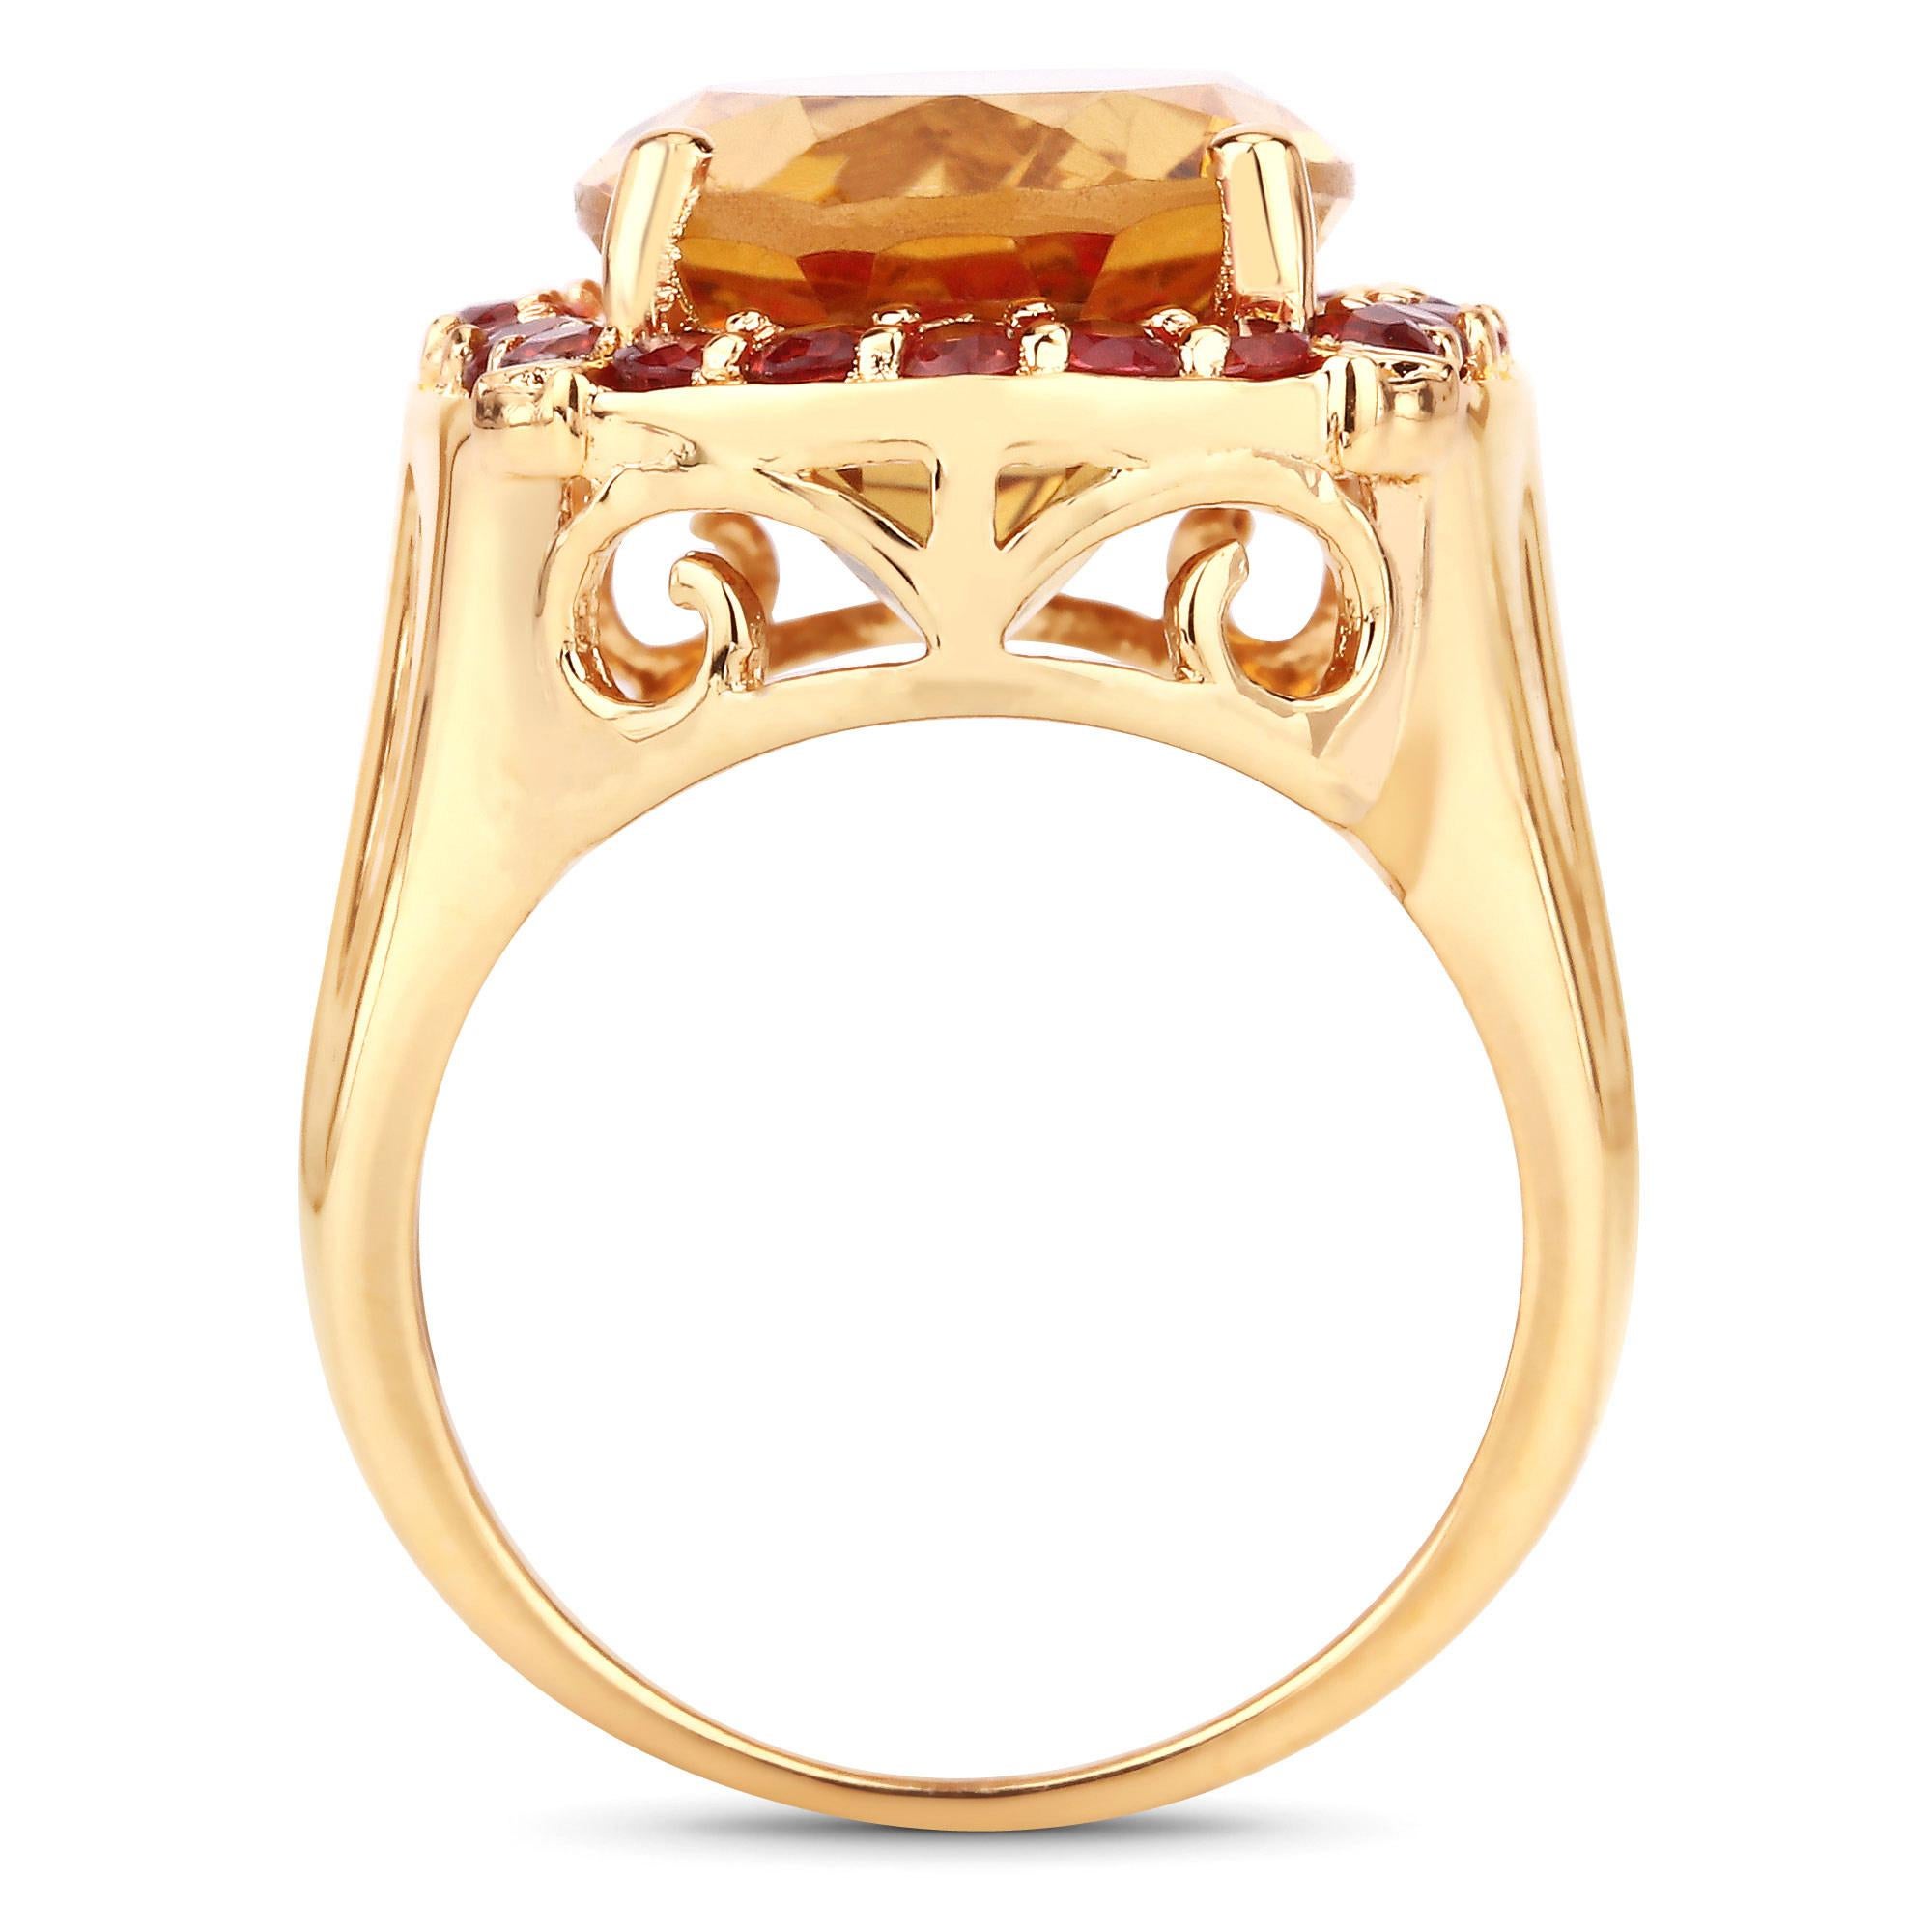 It comes with the appraisal by GIA GG/AJP
Citrine = 8.50 Carat
Cut: Oval
Dimensions: 16 x 12 mm
Sapphire = 0.90 Carats
Sapphires Quantity: 22
Metal: Sterling Silver
14K Yellow Gold Plated
Ring Size: 7* US
*It can be resized complimentary